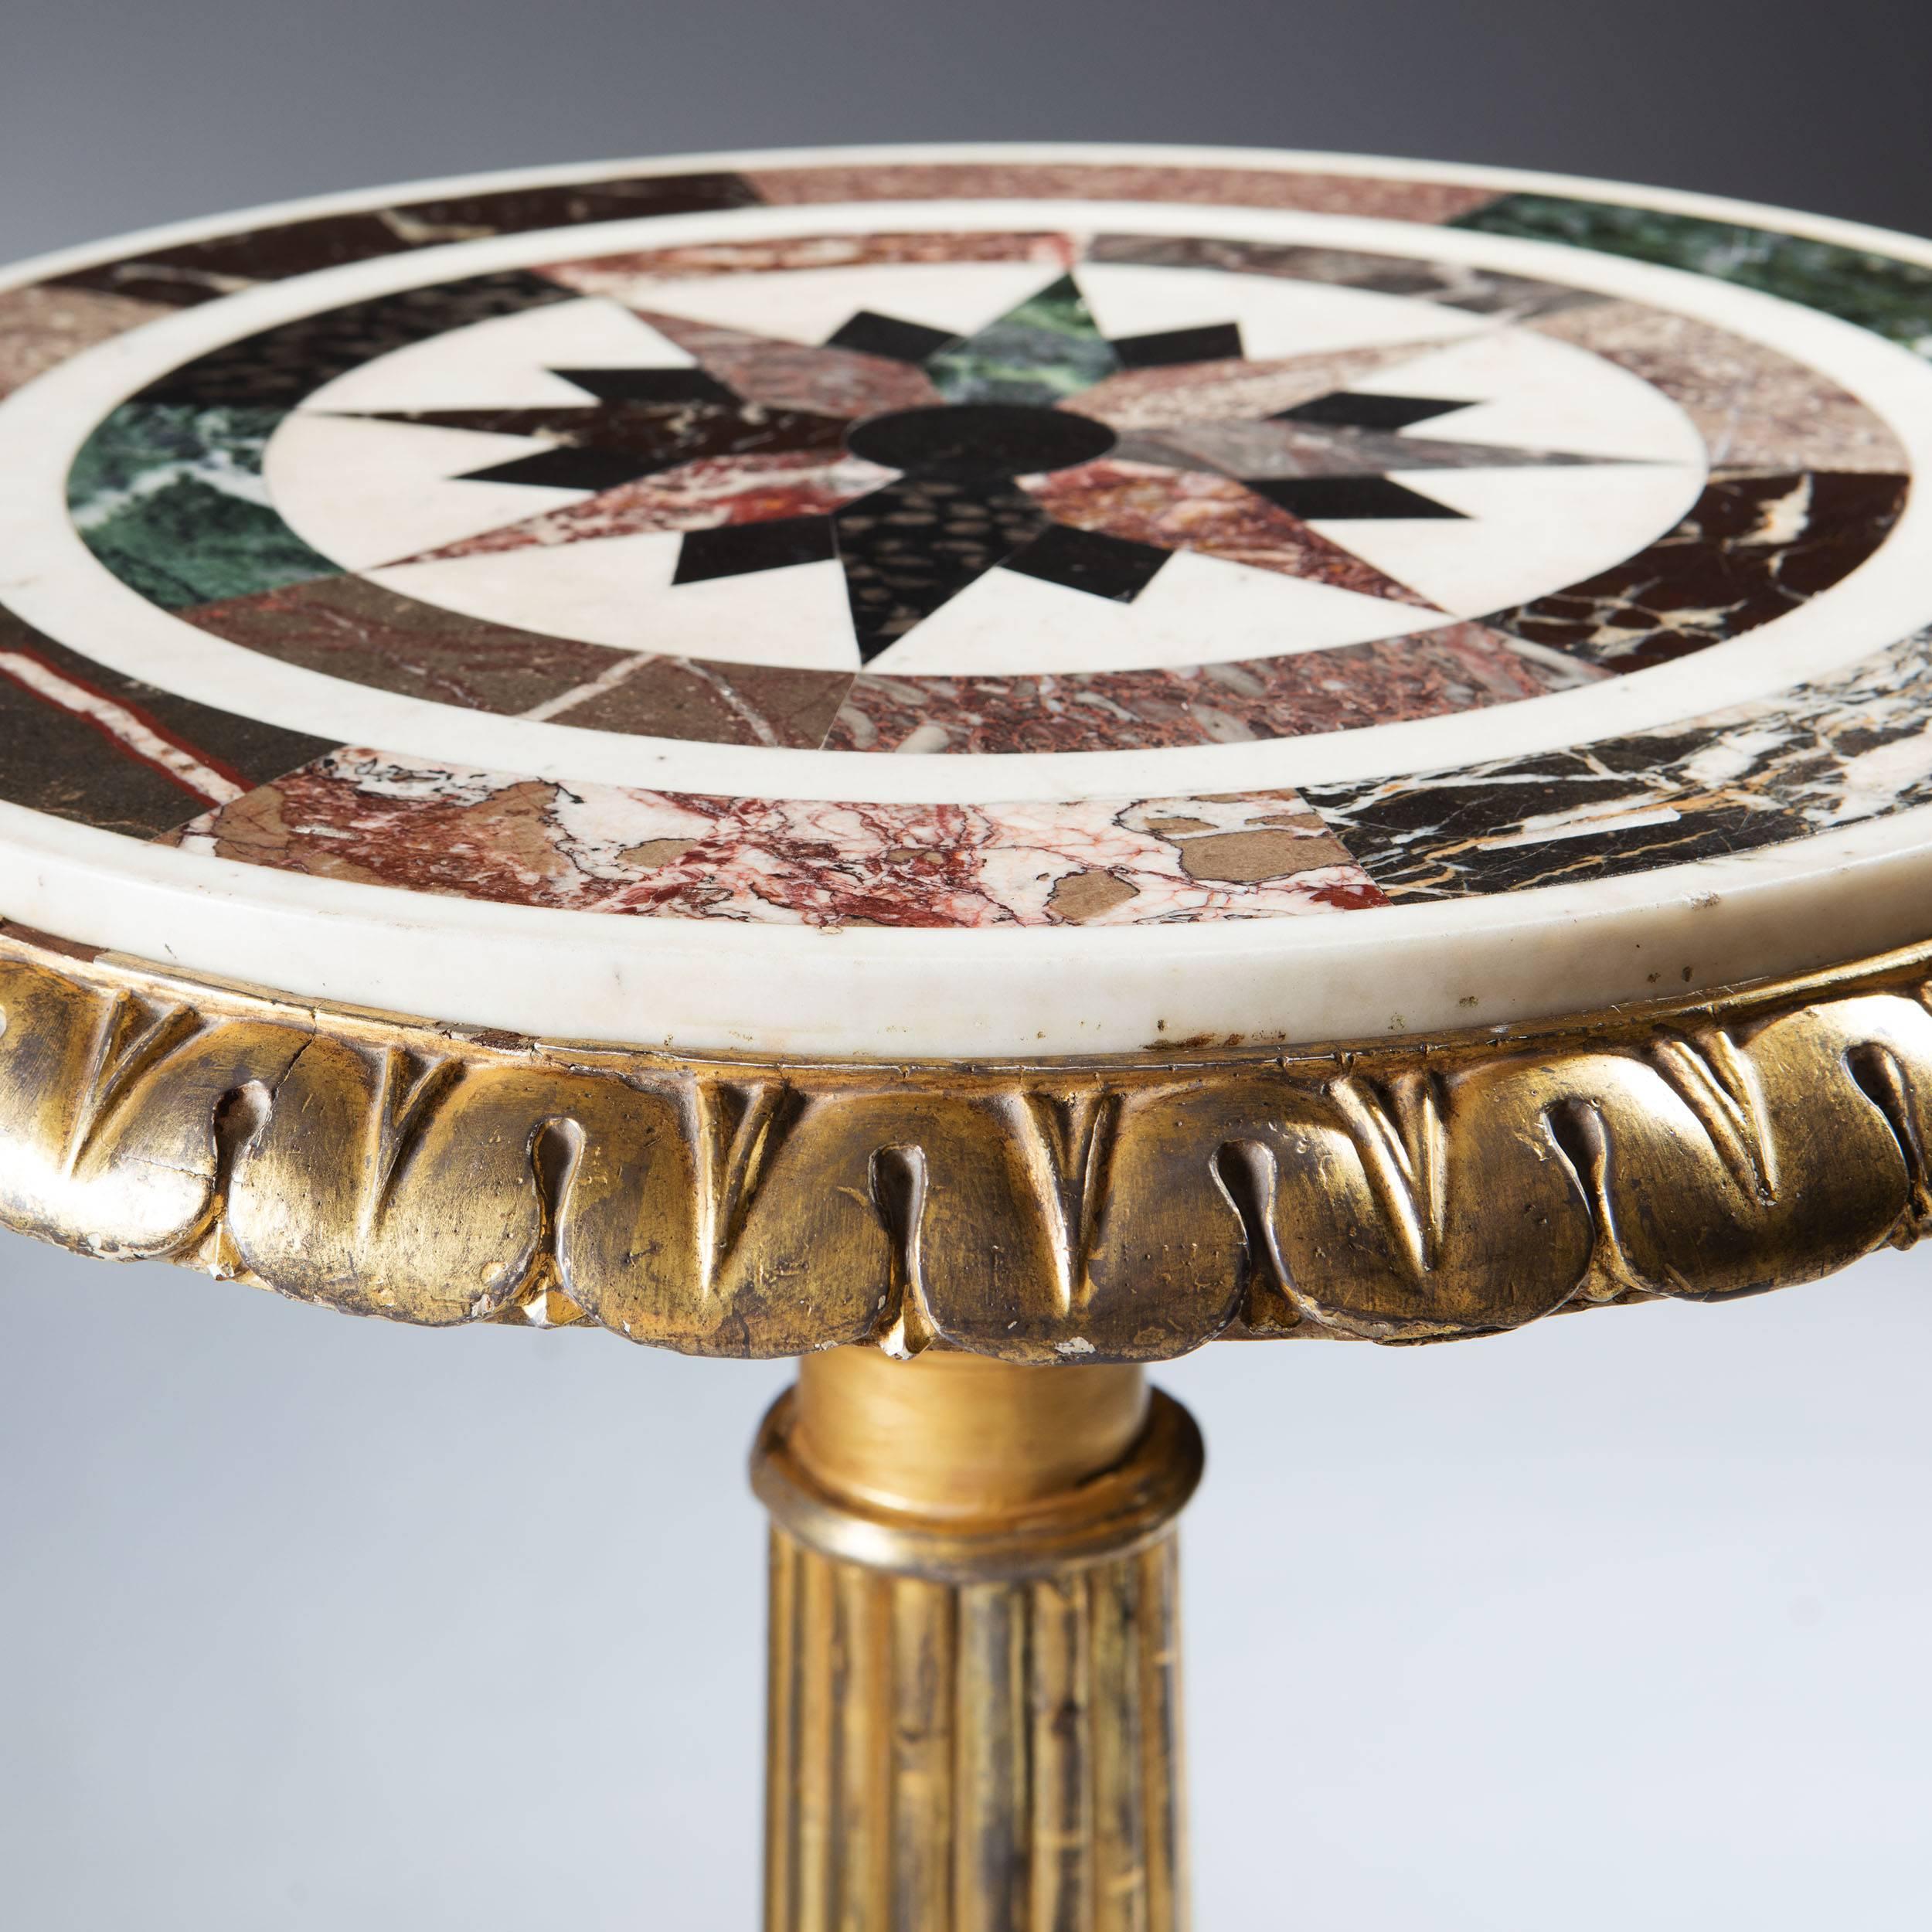 William IV Giltwood and Pietra Dure Occasional Table In Excellent Condition In London, by appointment only